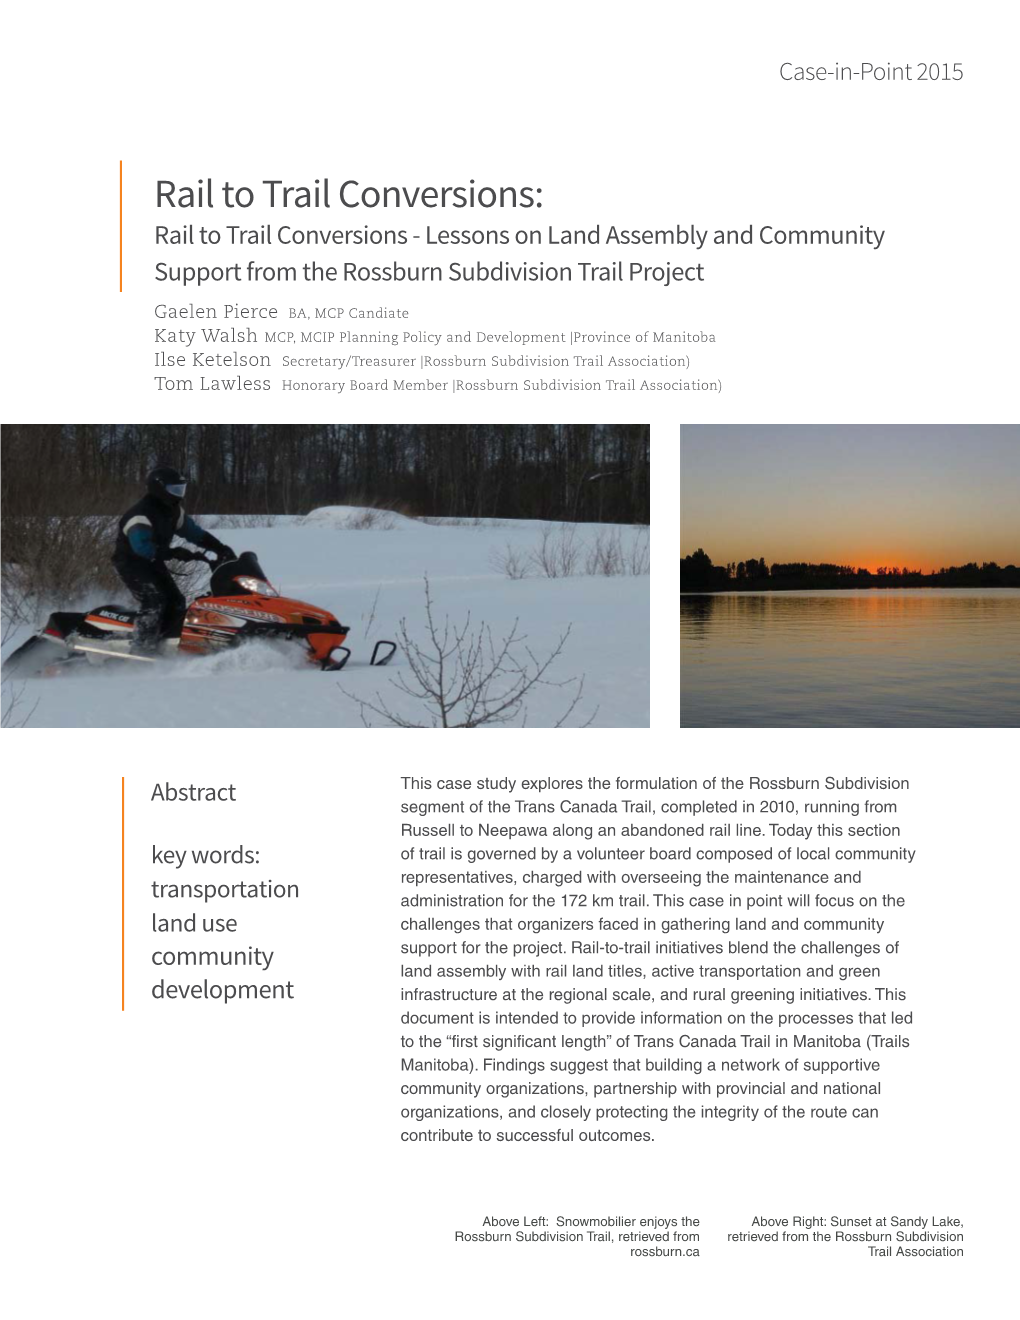 Rail to Trail Conversions: Rail to Trail Conversions - Lessons on Land Assembly and Community Support from the Rossburn Subdivision Trail Project